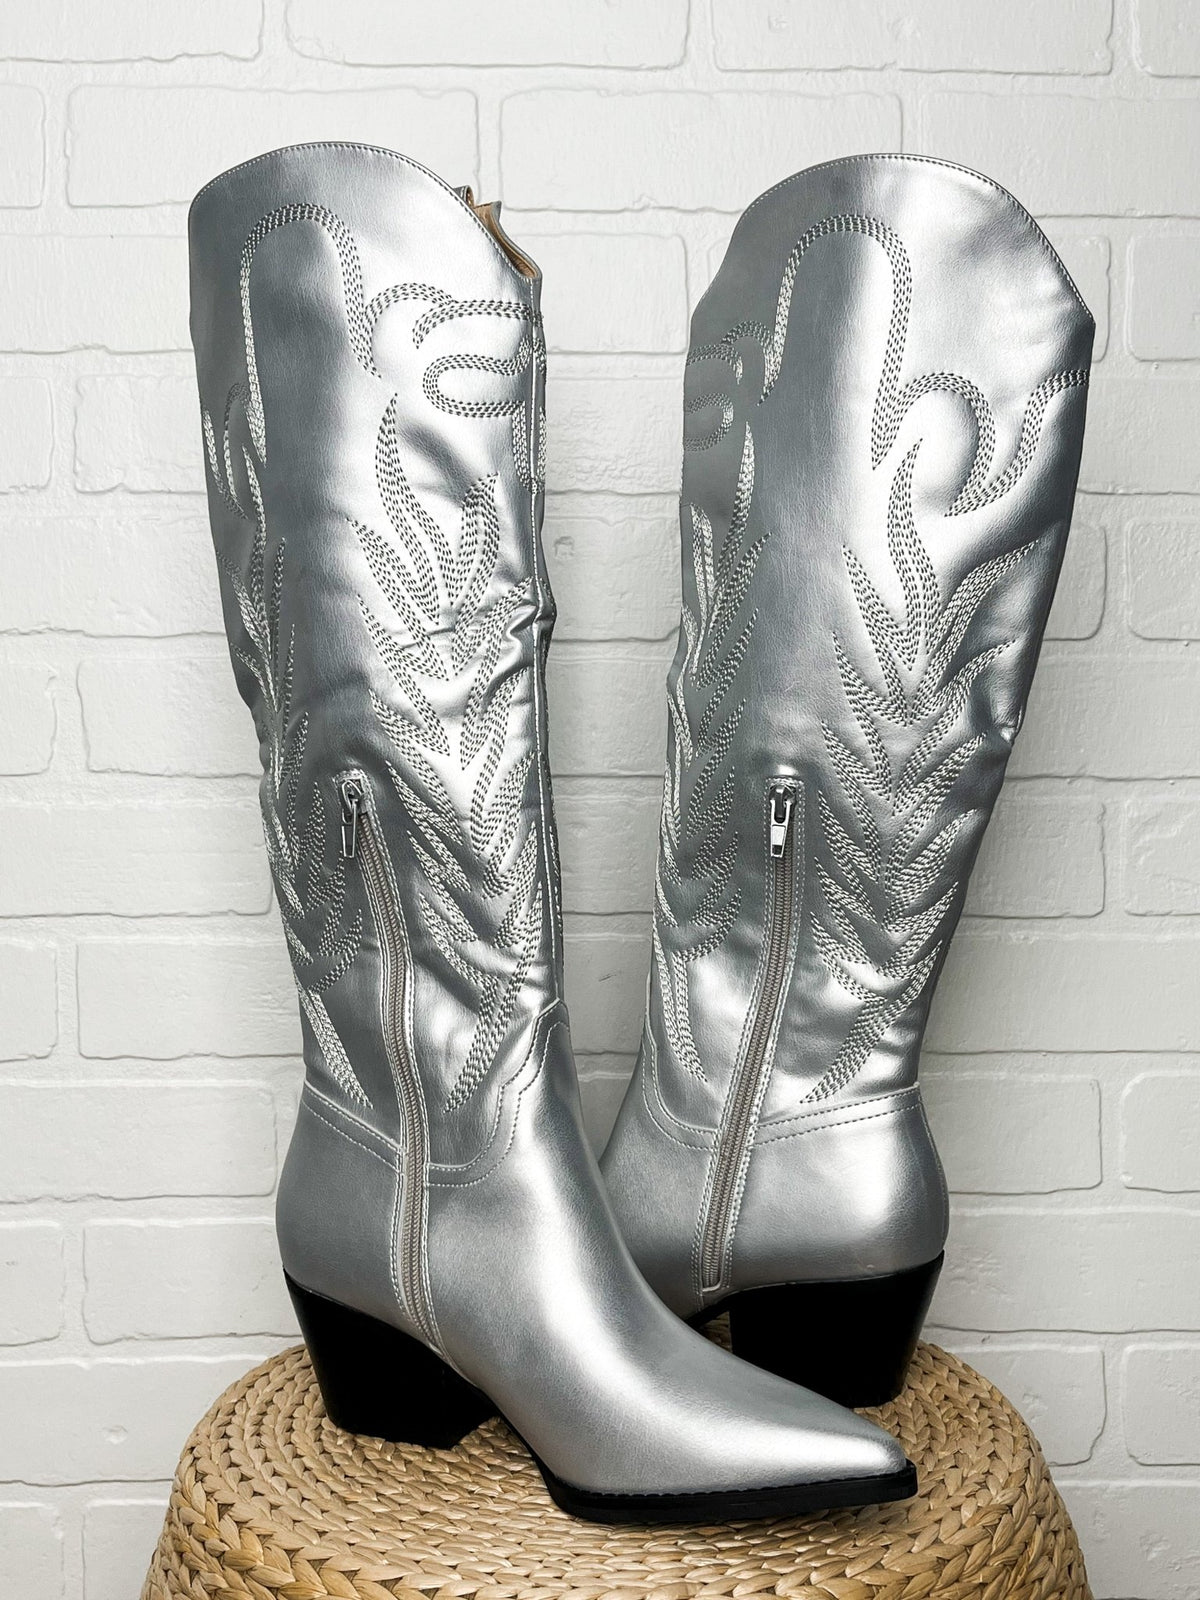 Samara cowboy boots silver - Cute Shoes - Trendy Shoes at Lush Fashion Lounge Boutique in Oklahoma City